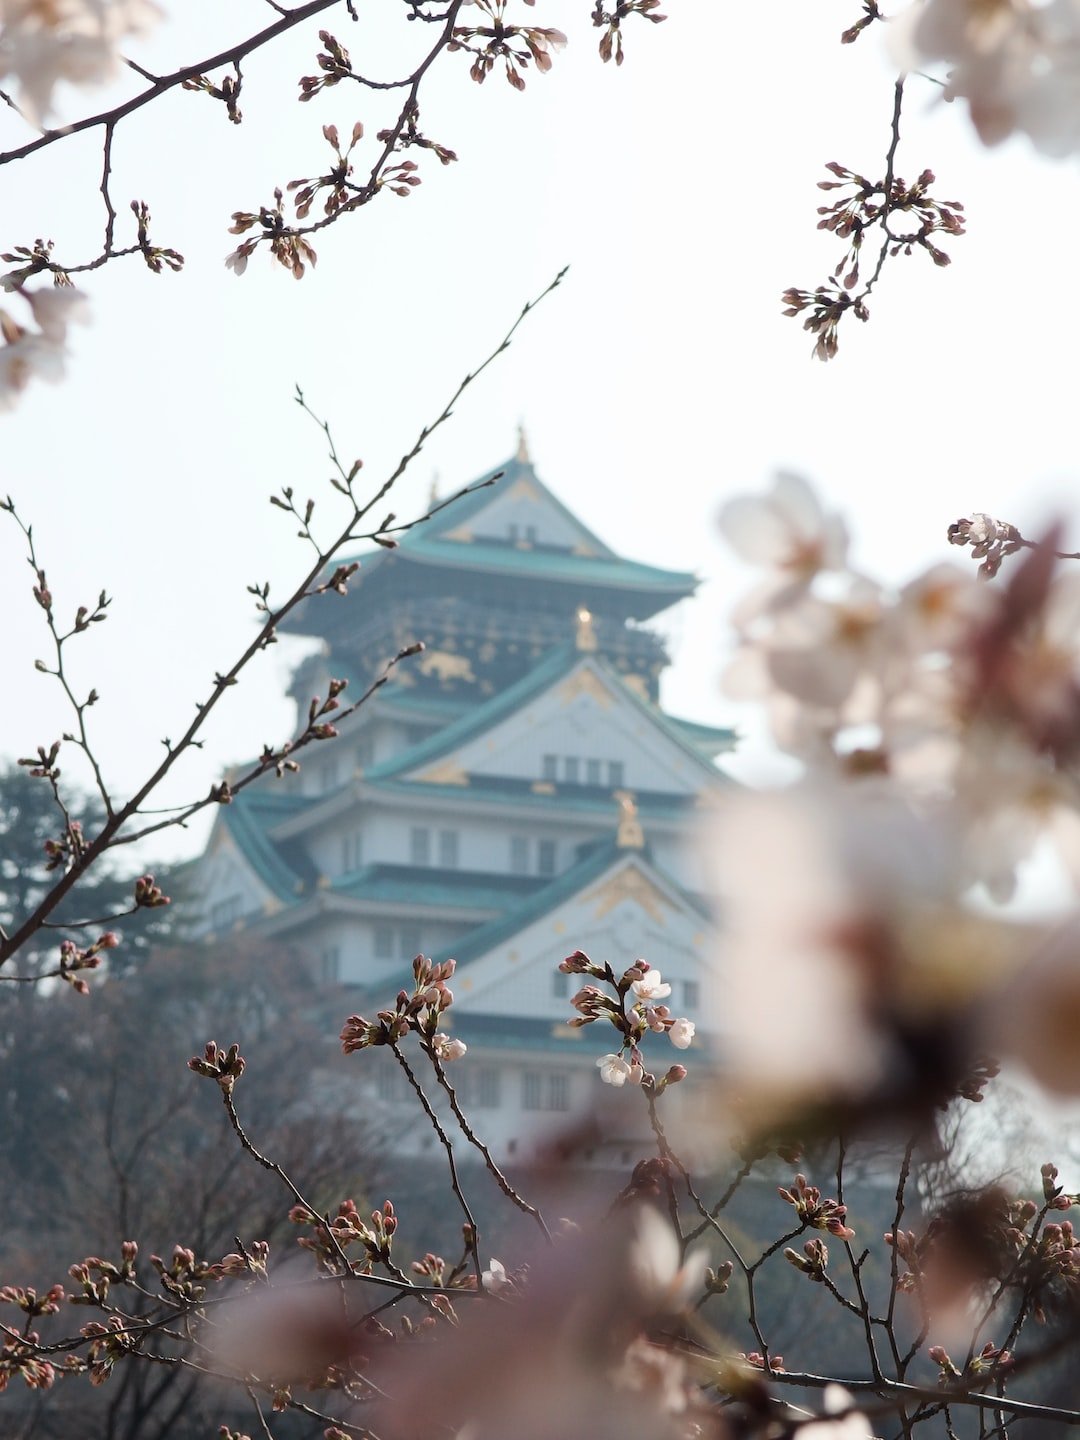 Exploring Ueno Park is a glimpse into Japan's rich cultural heritage.